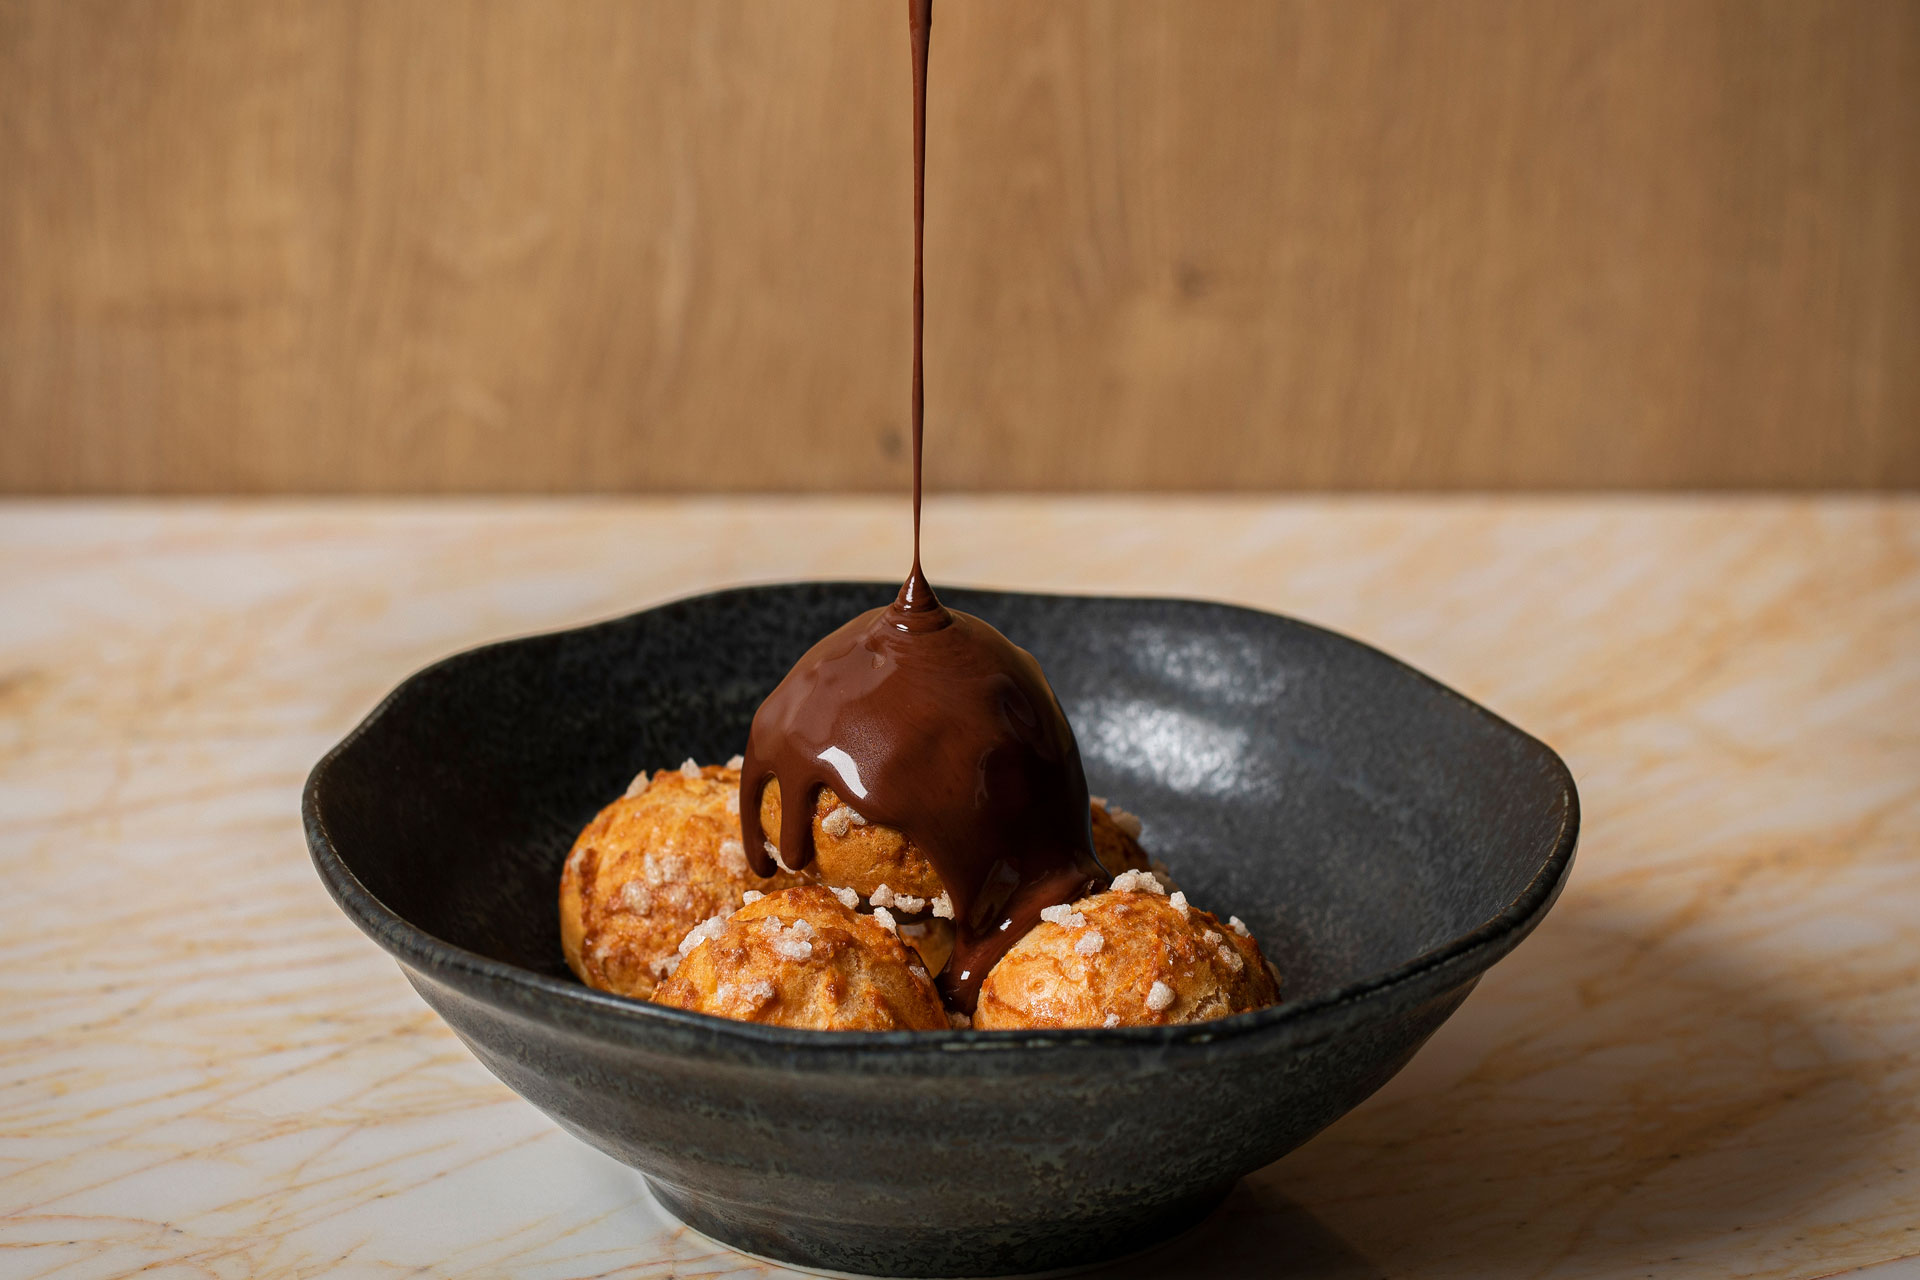 Black bowl filled with fried sweett treats with chocolate sauce drizzled over the top